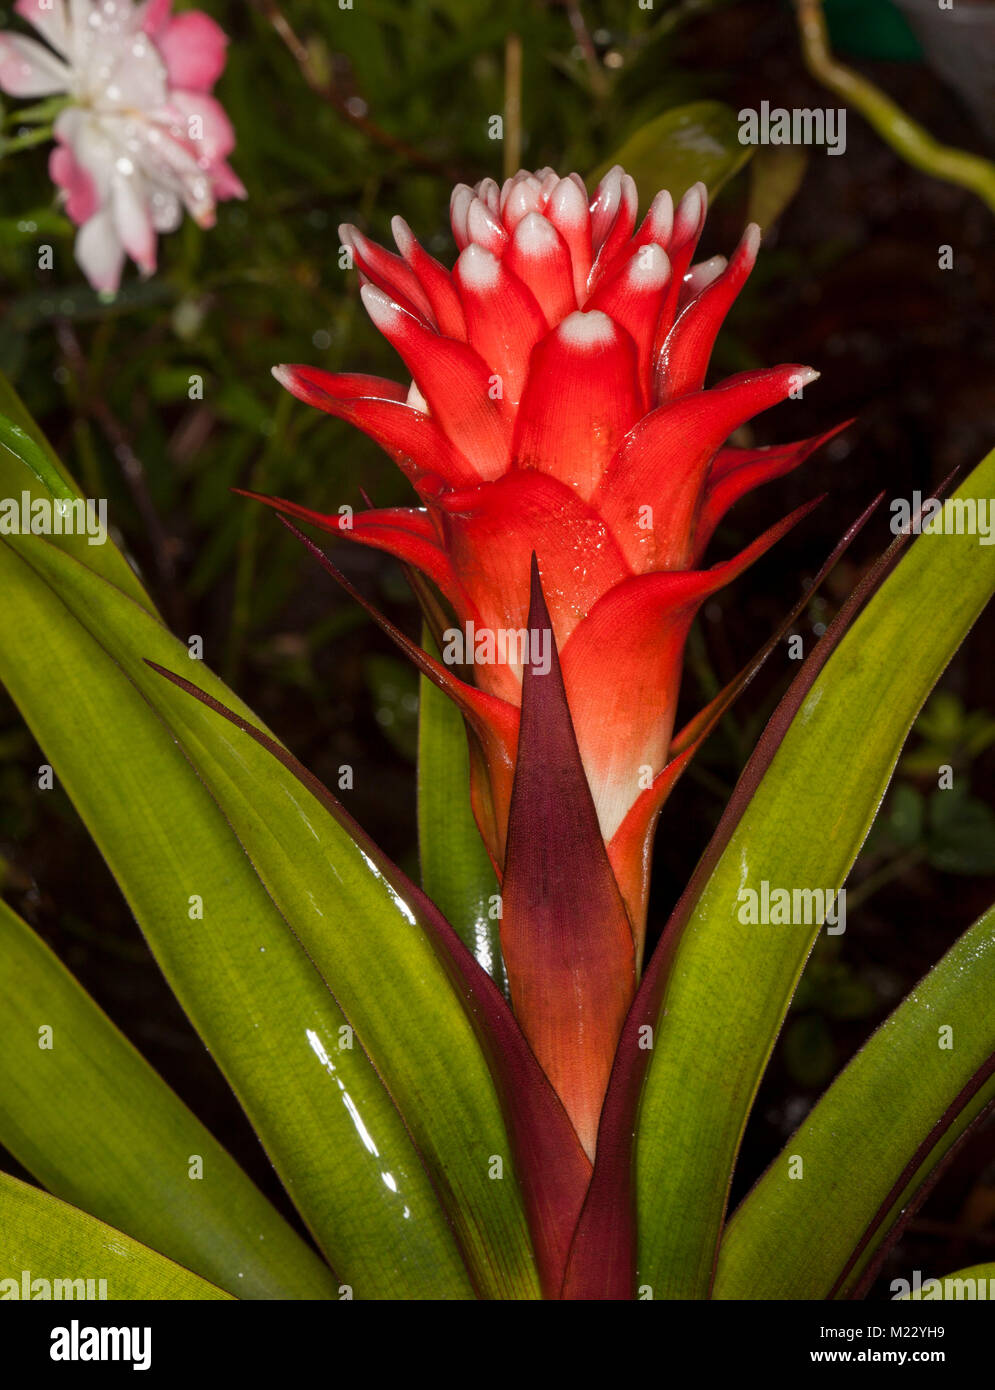 Stunning conical vivid red flower bracts with white tips and green leaves  of Guzmania, a bromeliad, against dark background Stock Photo